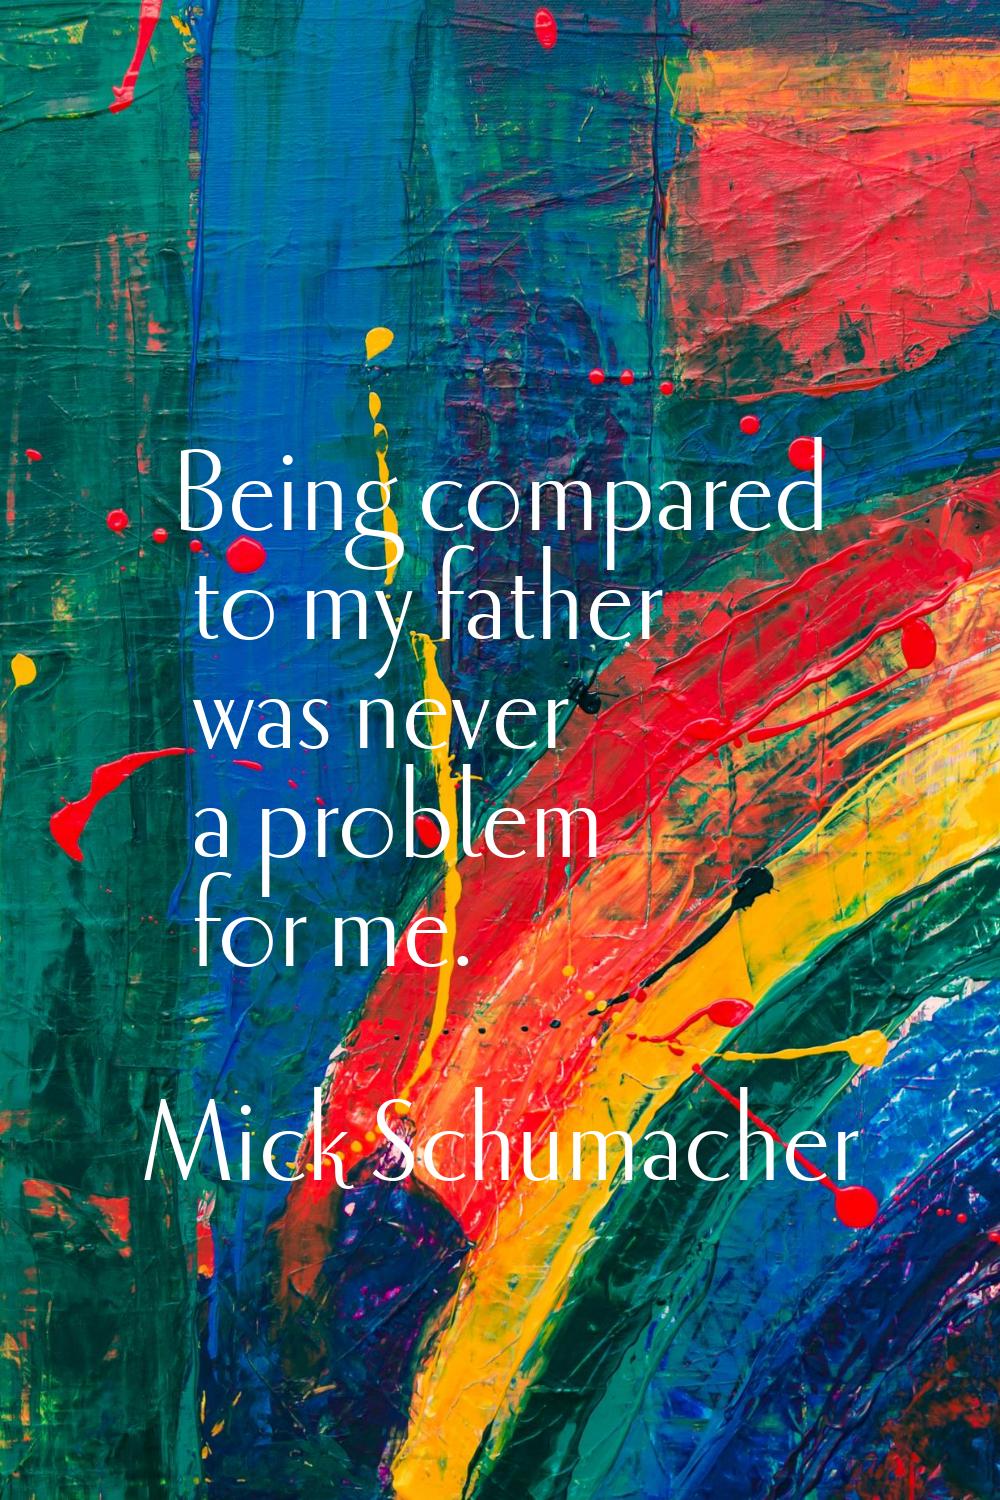 Being compared to my father was never a problem for me.